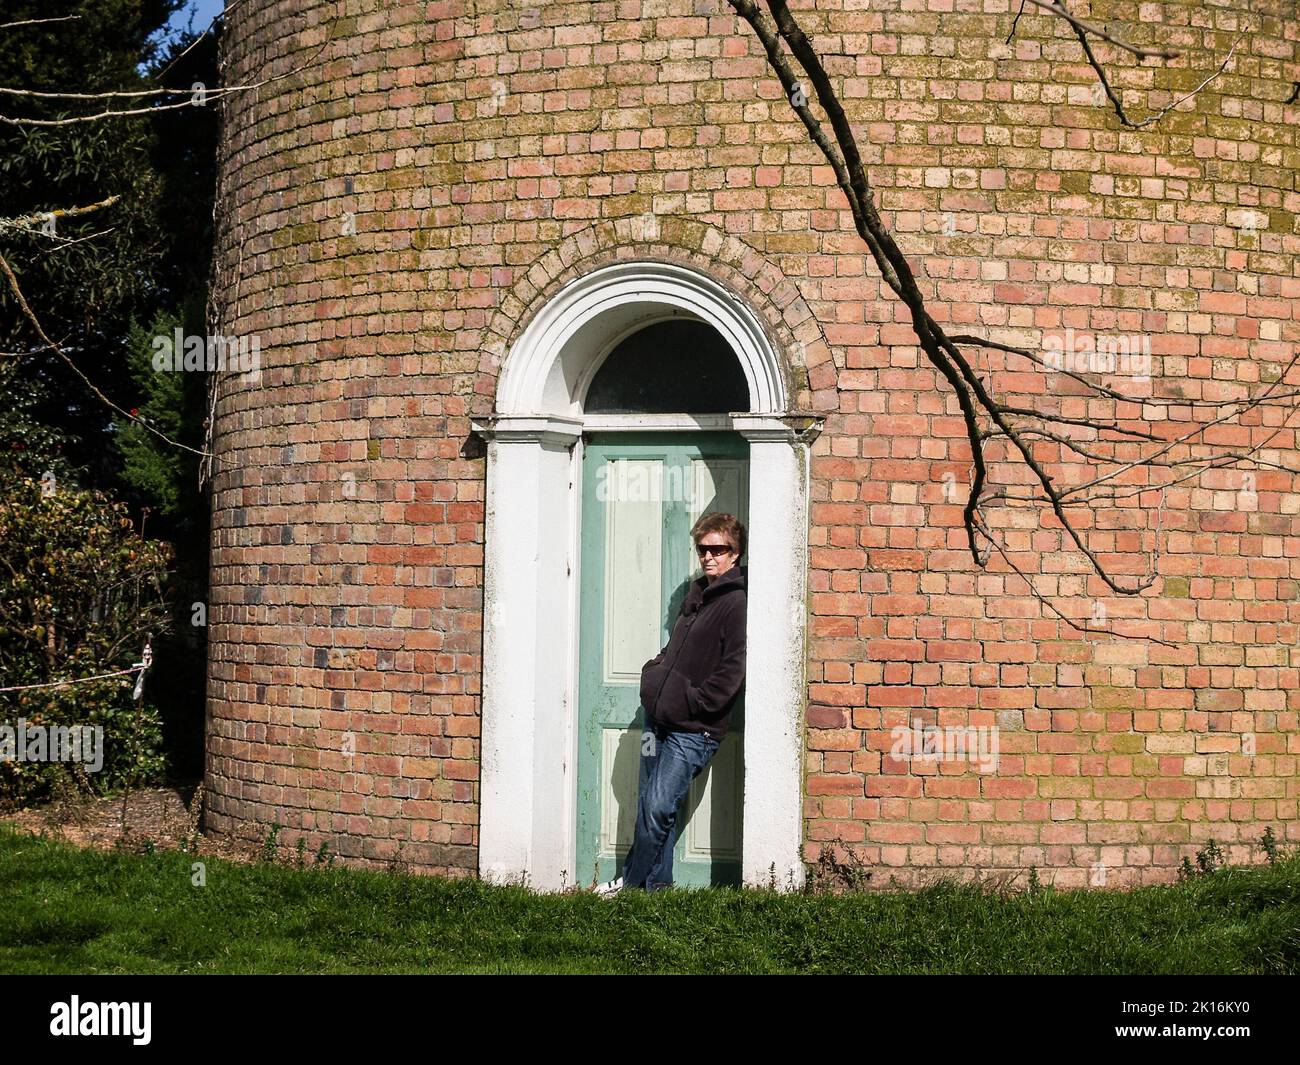 Cambridge-New Zealand- September 9 2008; Woman casually sheltering in doorway of old water-tower Stock Photo